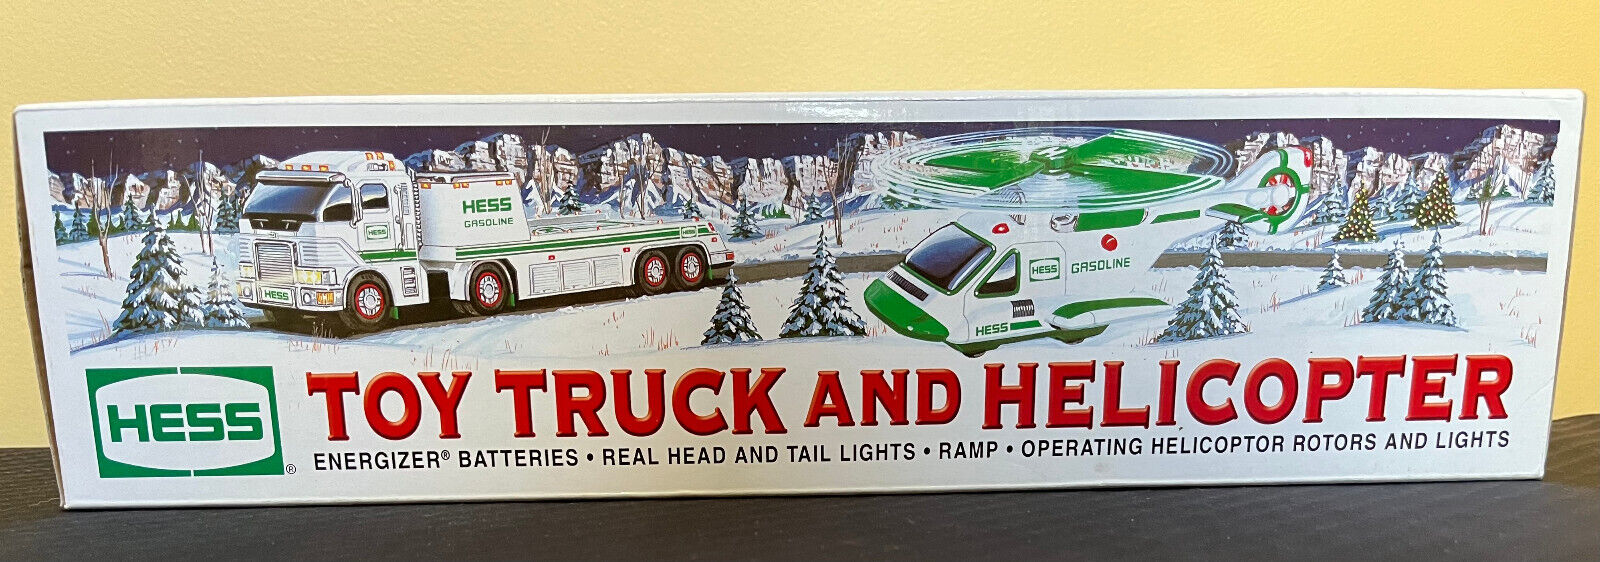 2006 HESS Toy Truck and Helicopter (New)